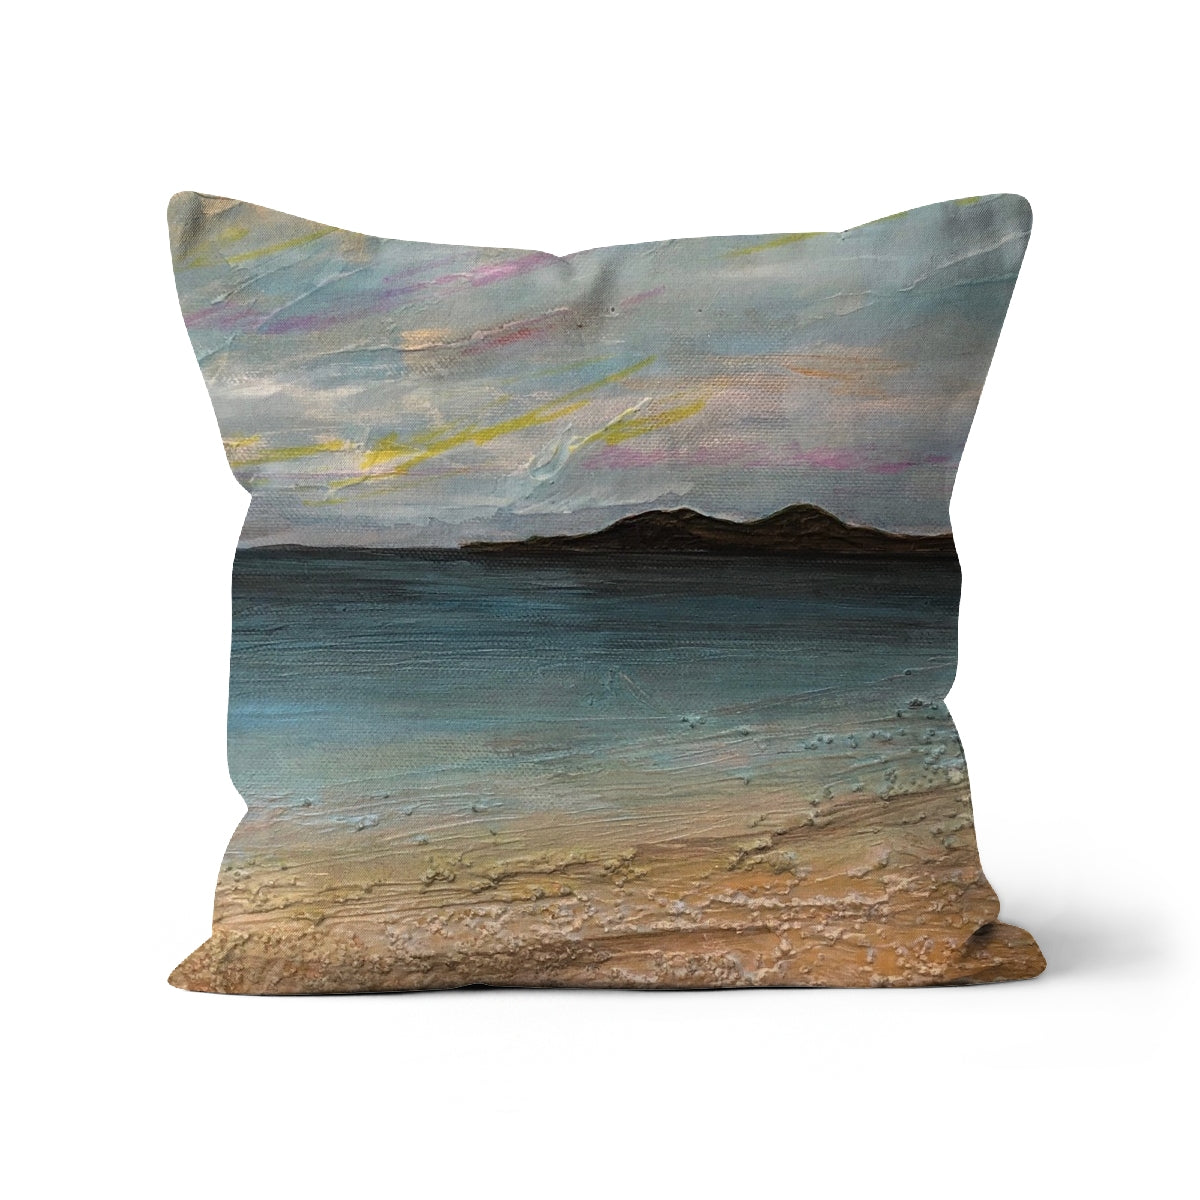 Garrynamonie Beach South Uist Art Gifts Cushion-Cushions-Hebridean Islands Art Gallery-Faux Suede-12"x12"-Paintings, Prints, Homeware, Art Gifts From Scotland By Scottish Artist Kevin Hunter